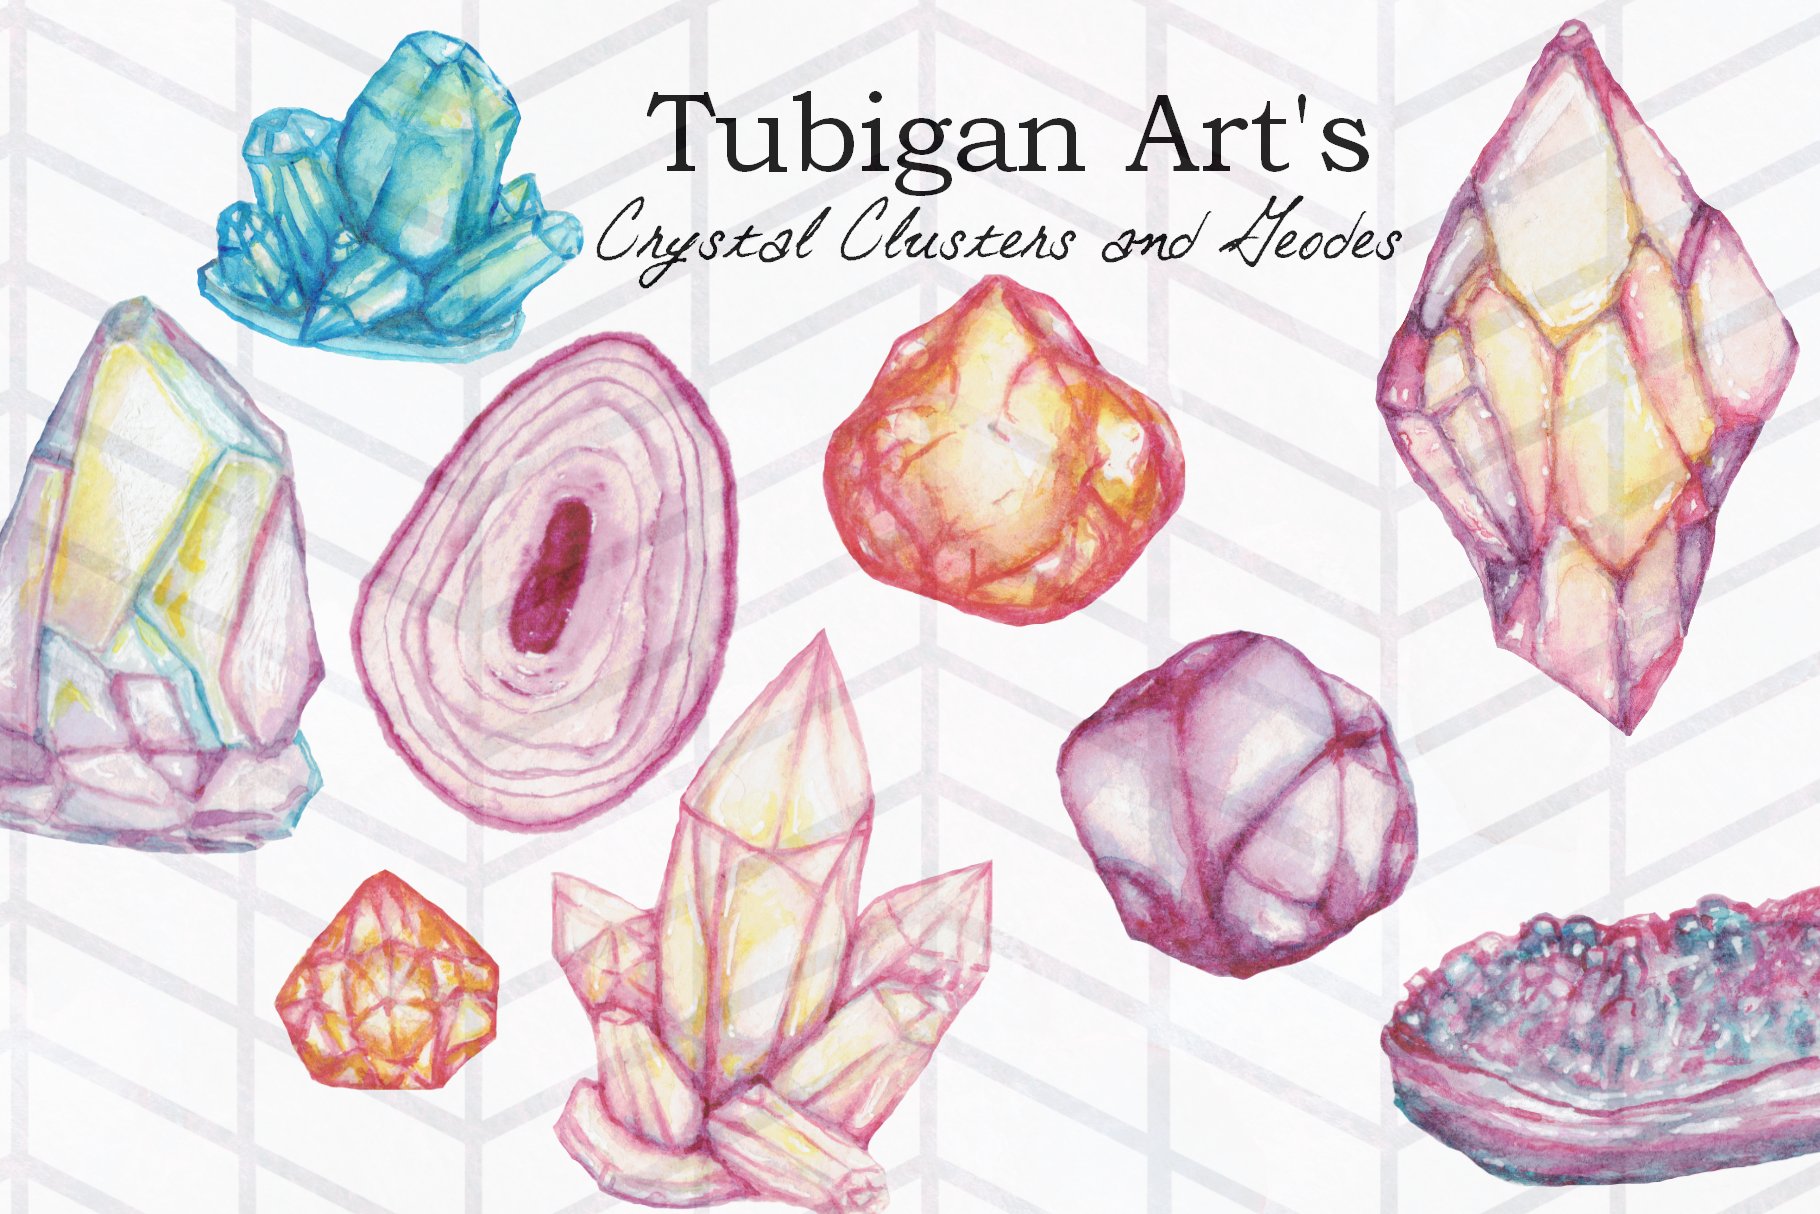 Watercolor Crystal Clusters & Geodes cover image.